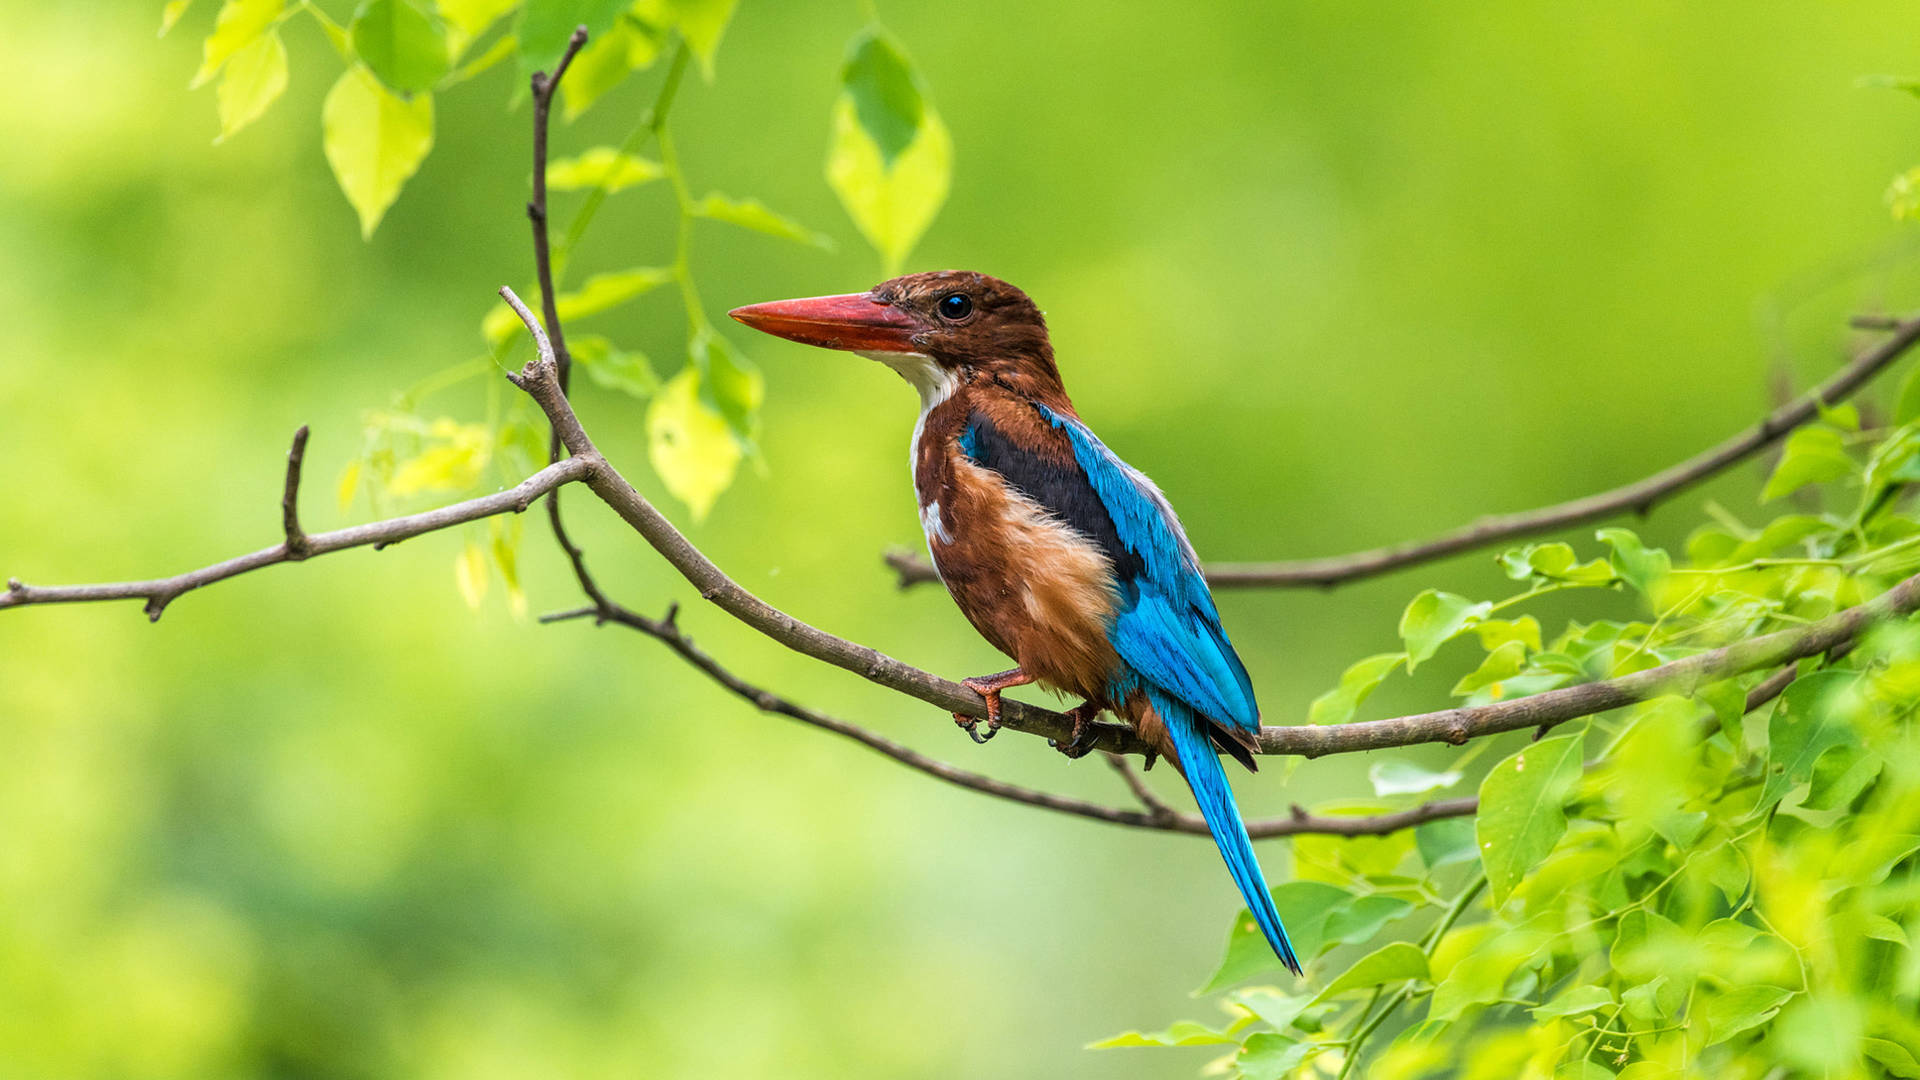 Ultra Hd Laptop Kingfisher On Branch Background